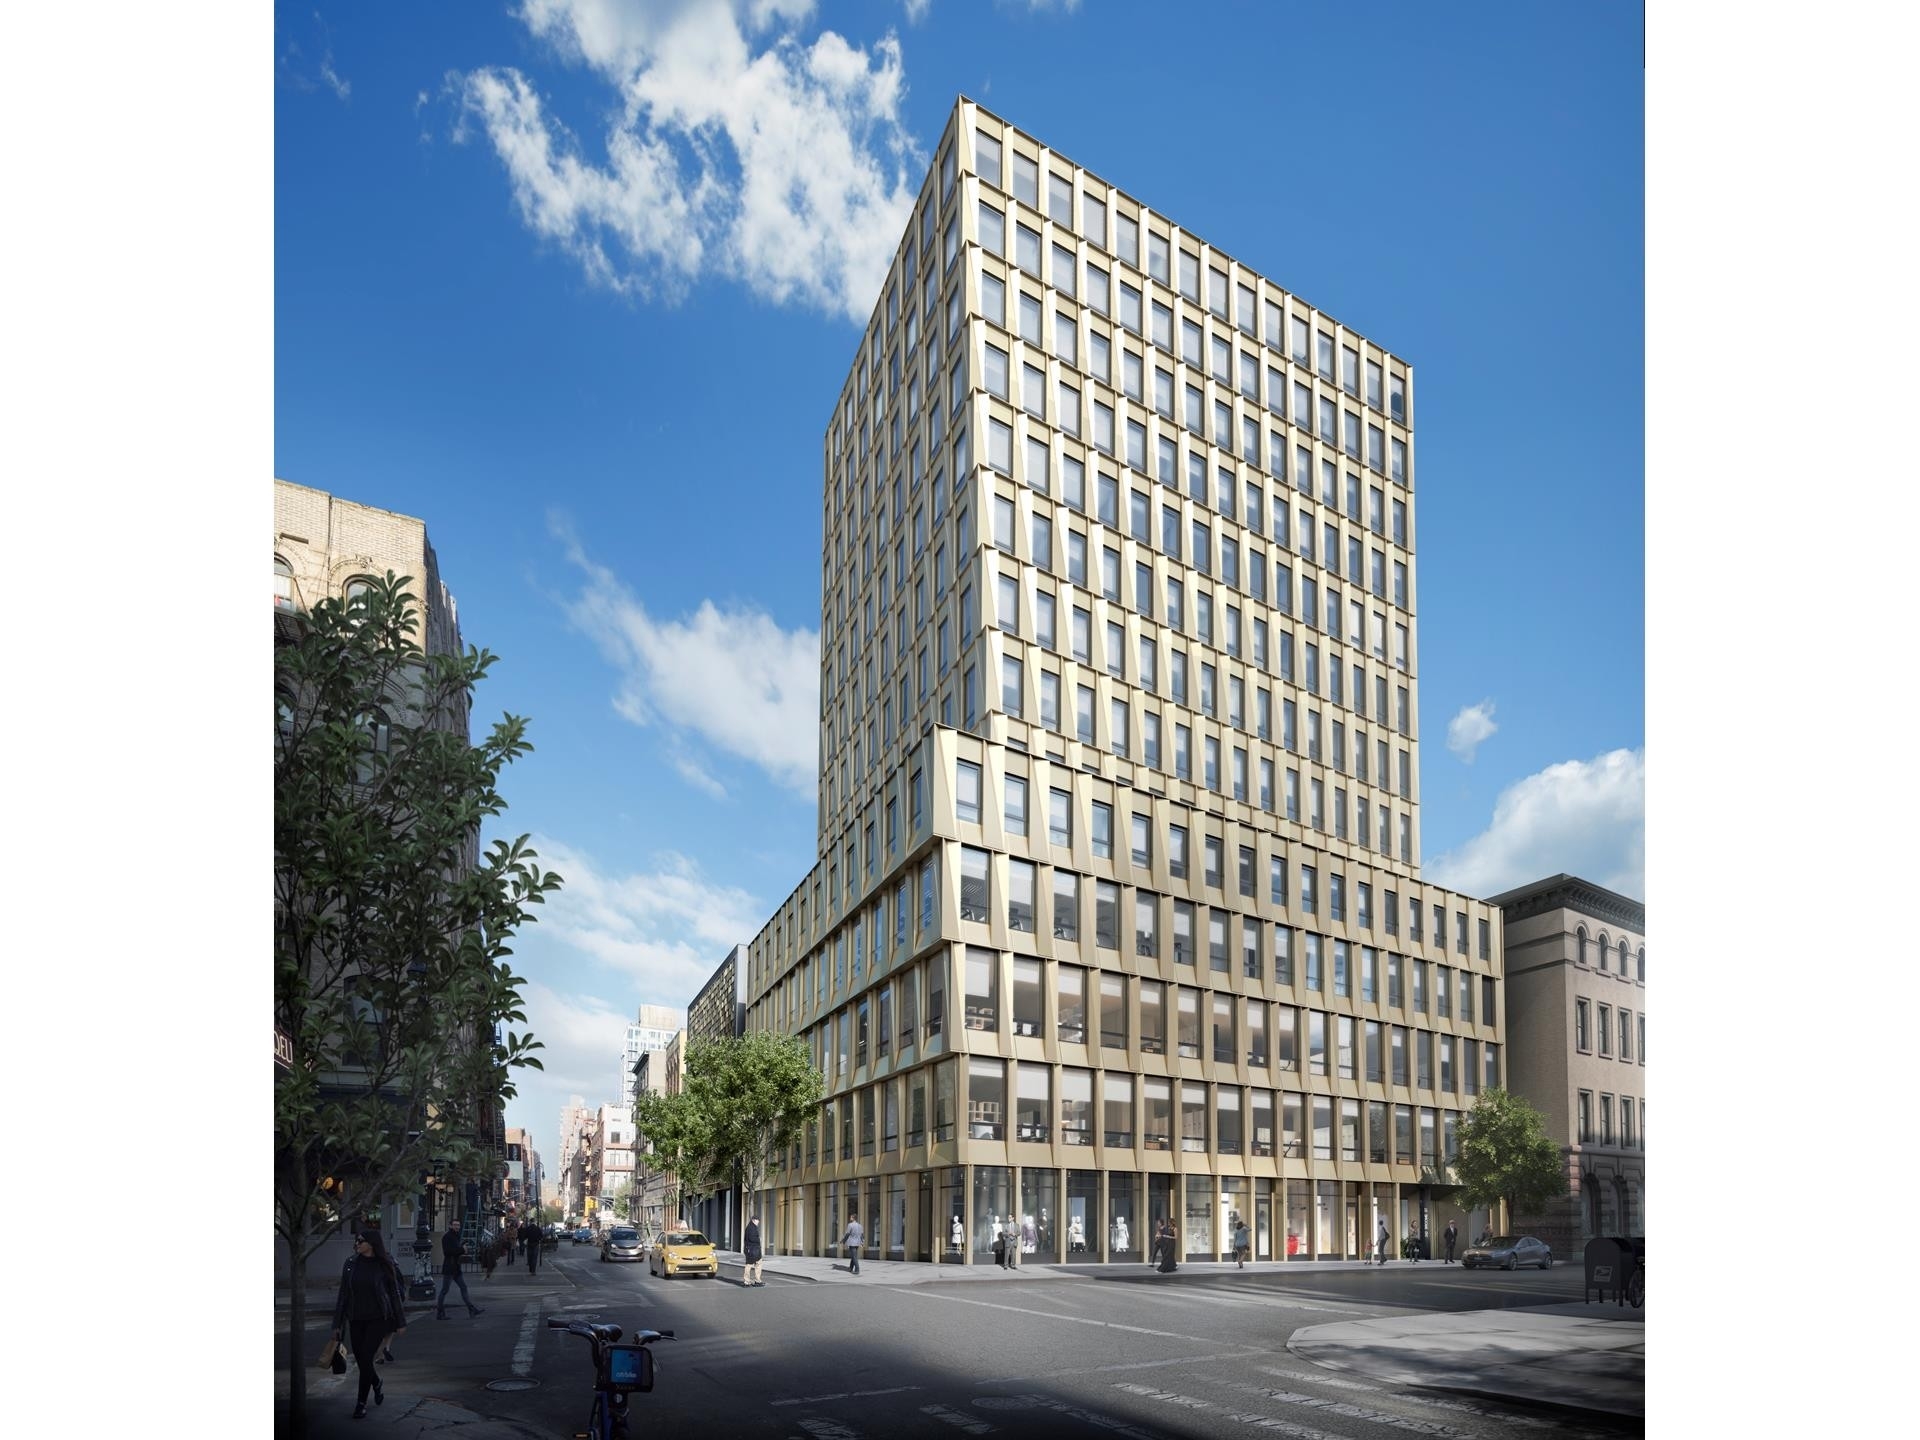 Condominium for Sale at Essex Crossing, 242 BROOME ST, 6B Lower East Side, New York, New York 10002